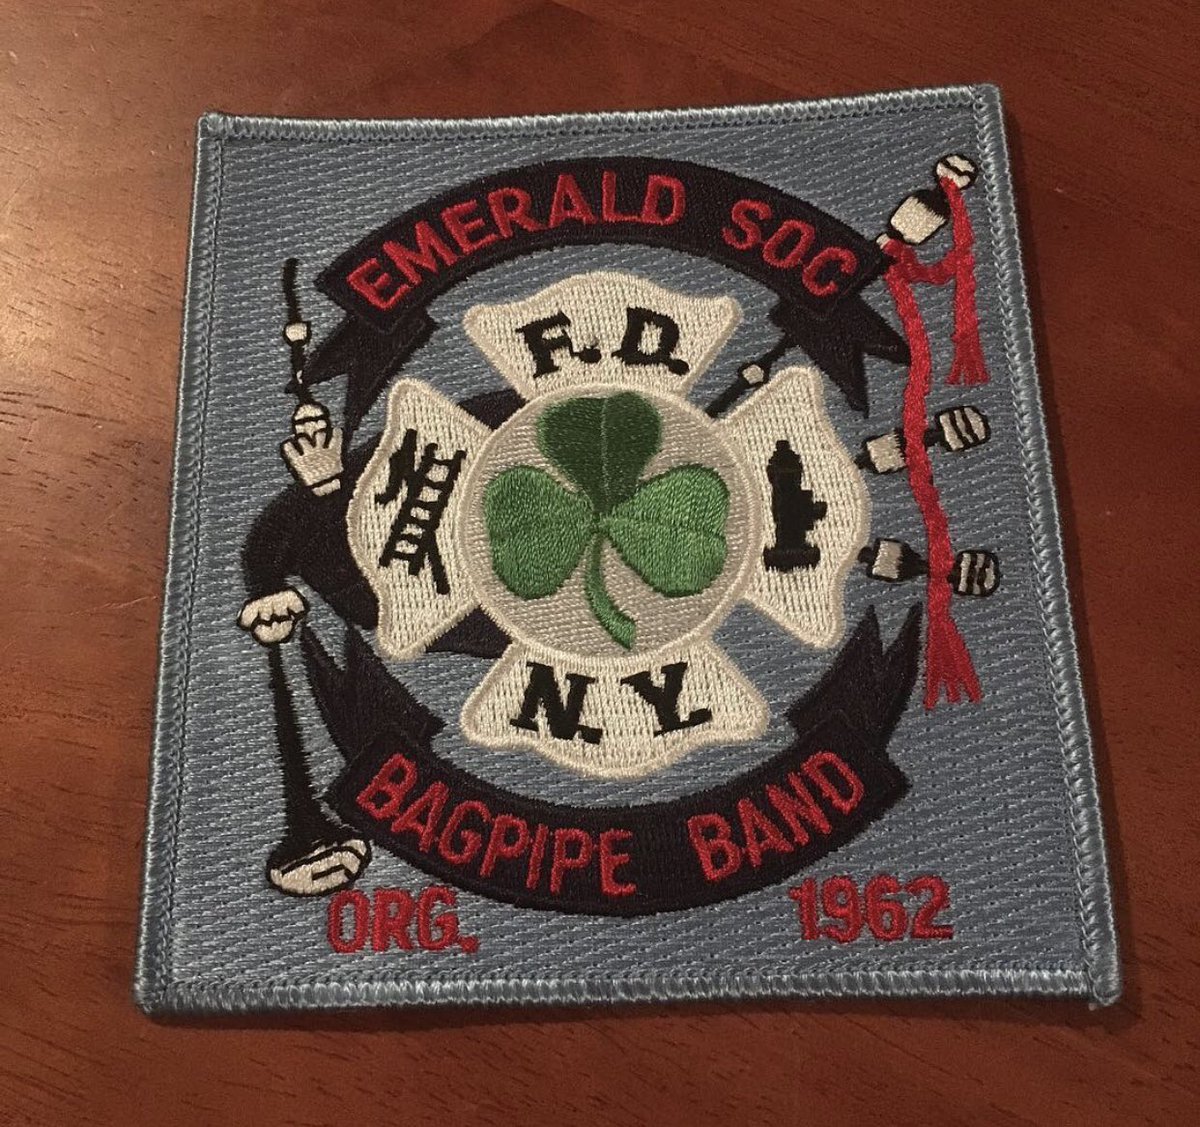 Next is the  @FDNYEmerald Pipes and Drums, probably one of the most famous Pipe and Drum bands in the world.